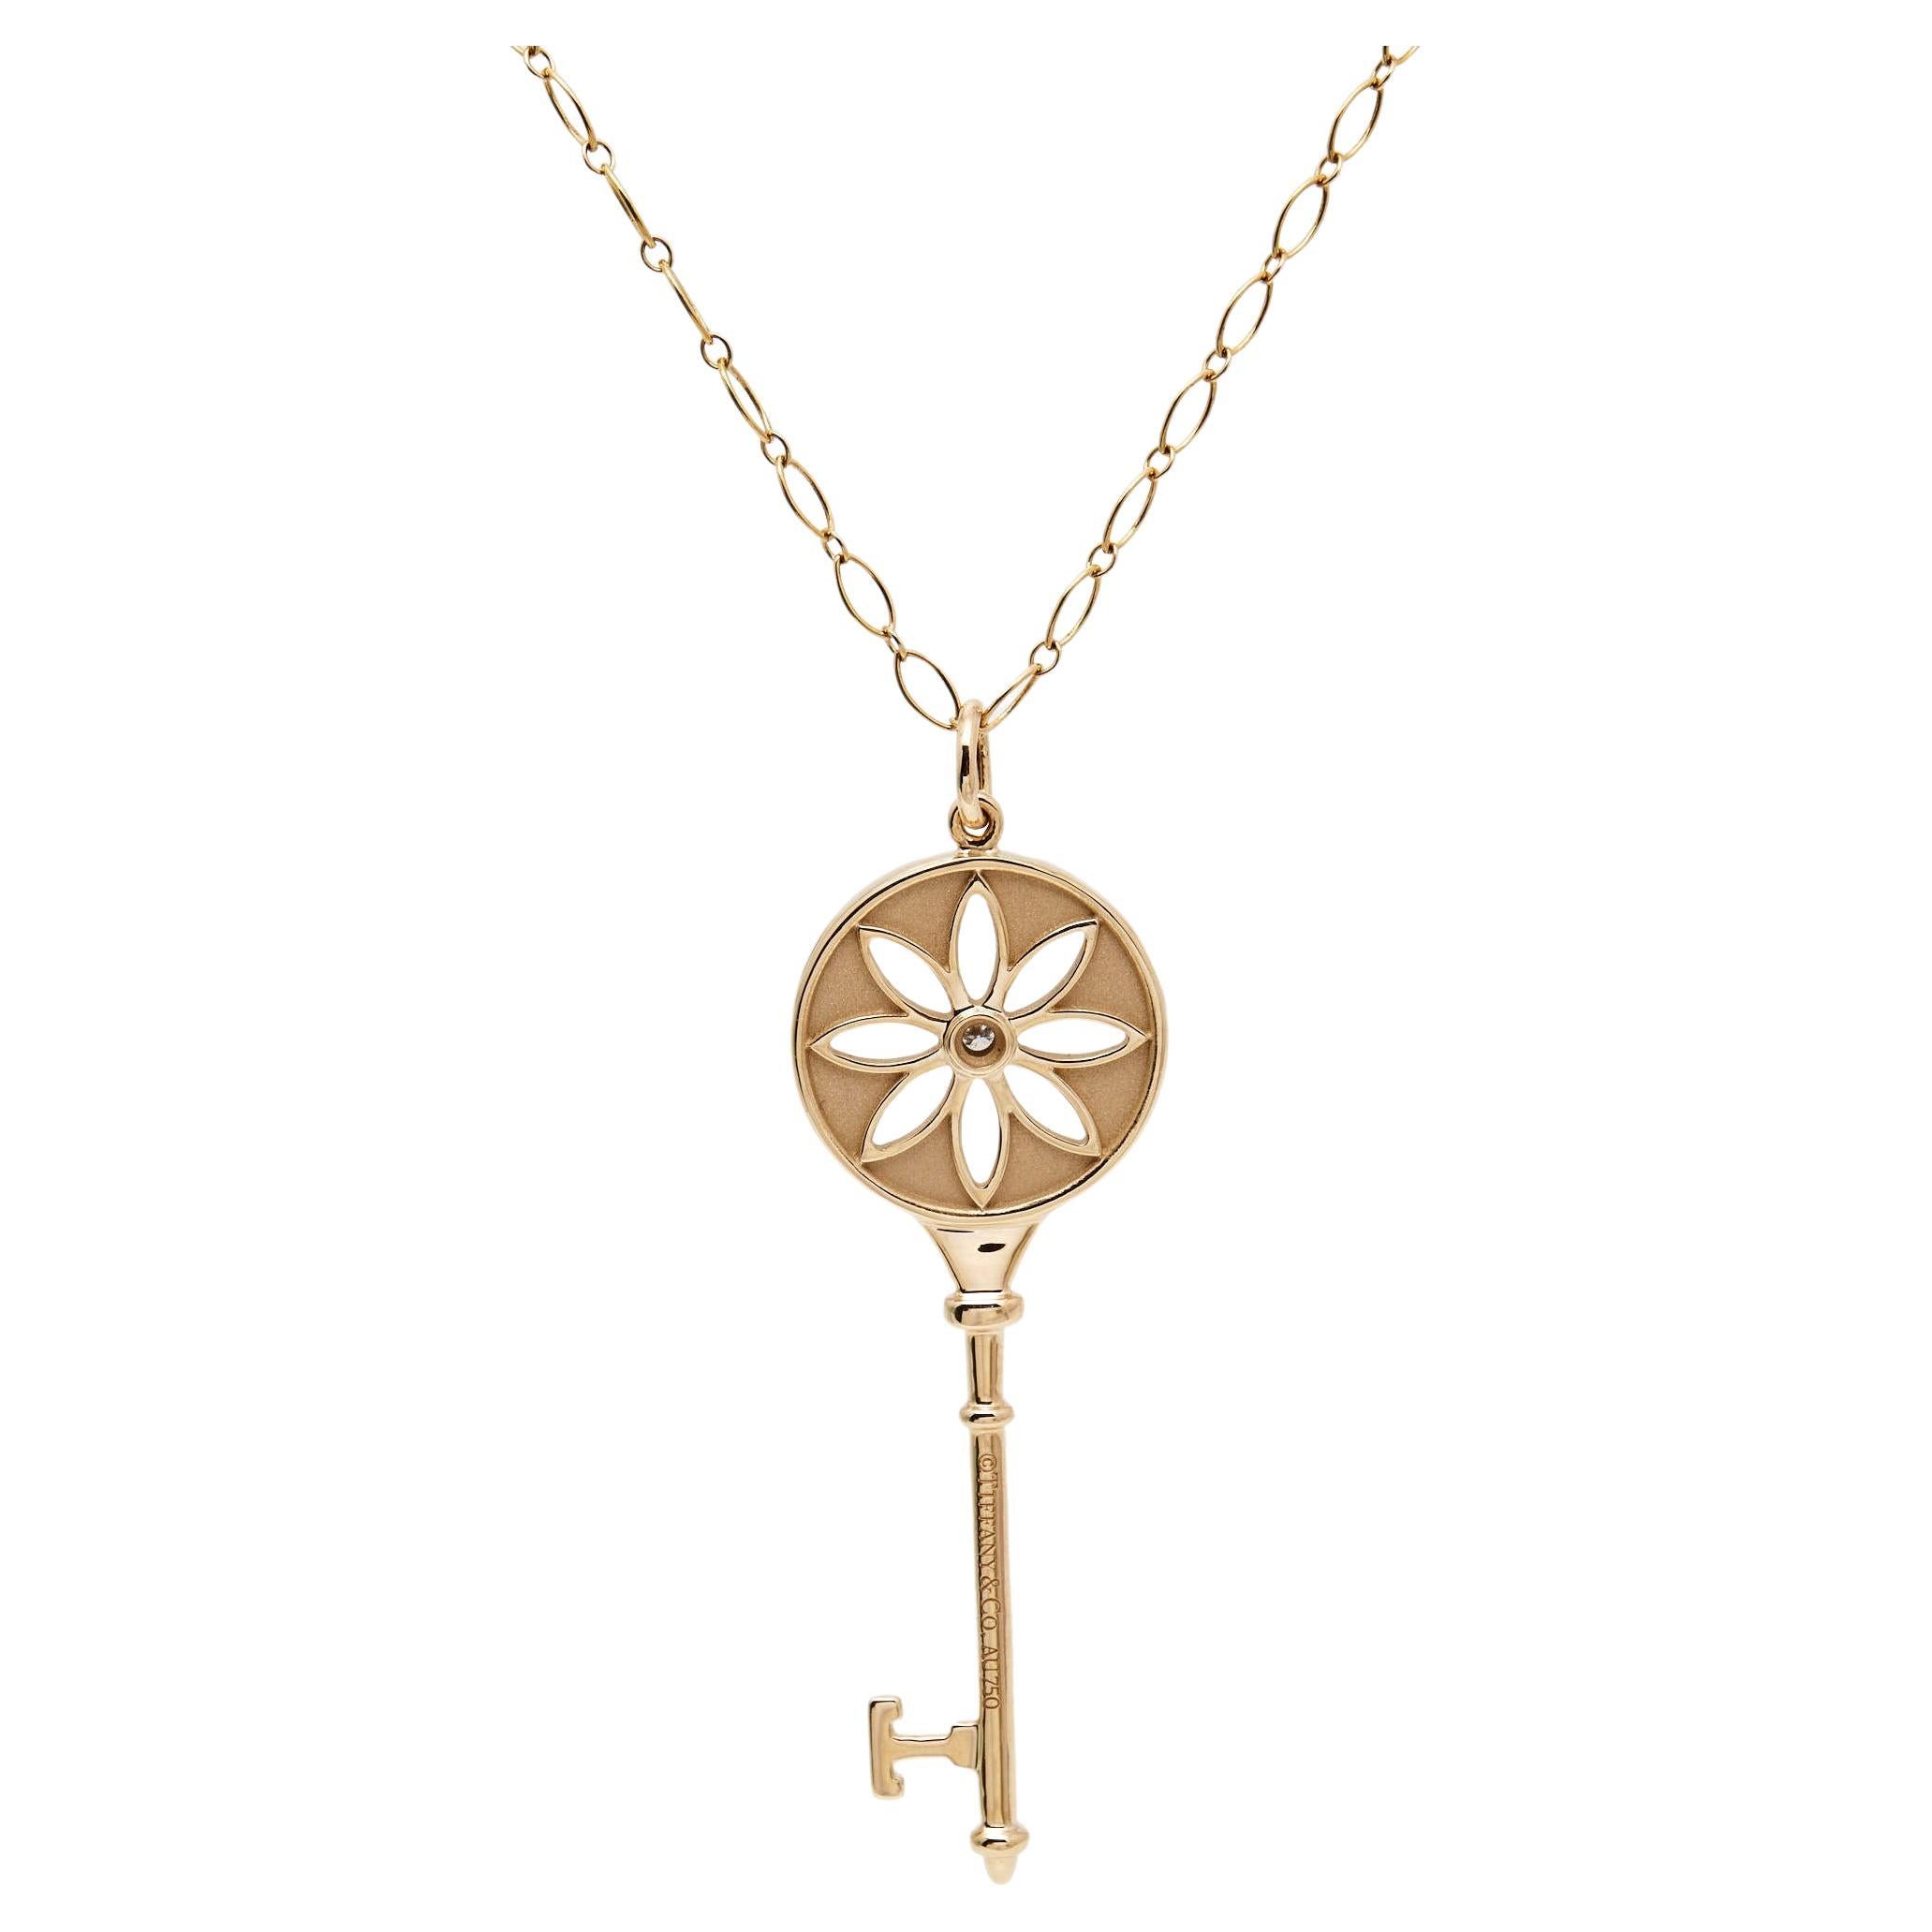 What does a key on a necklace mean?